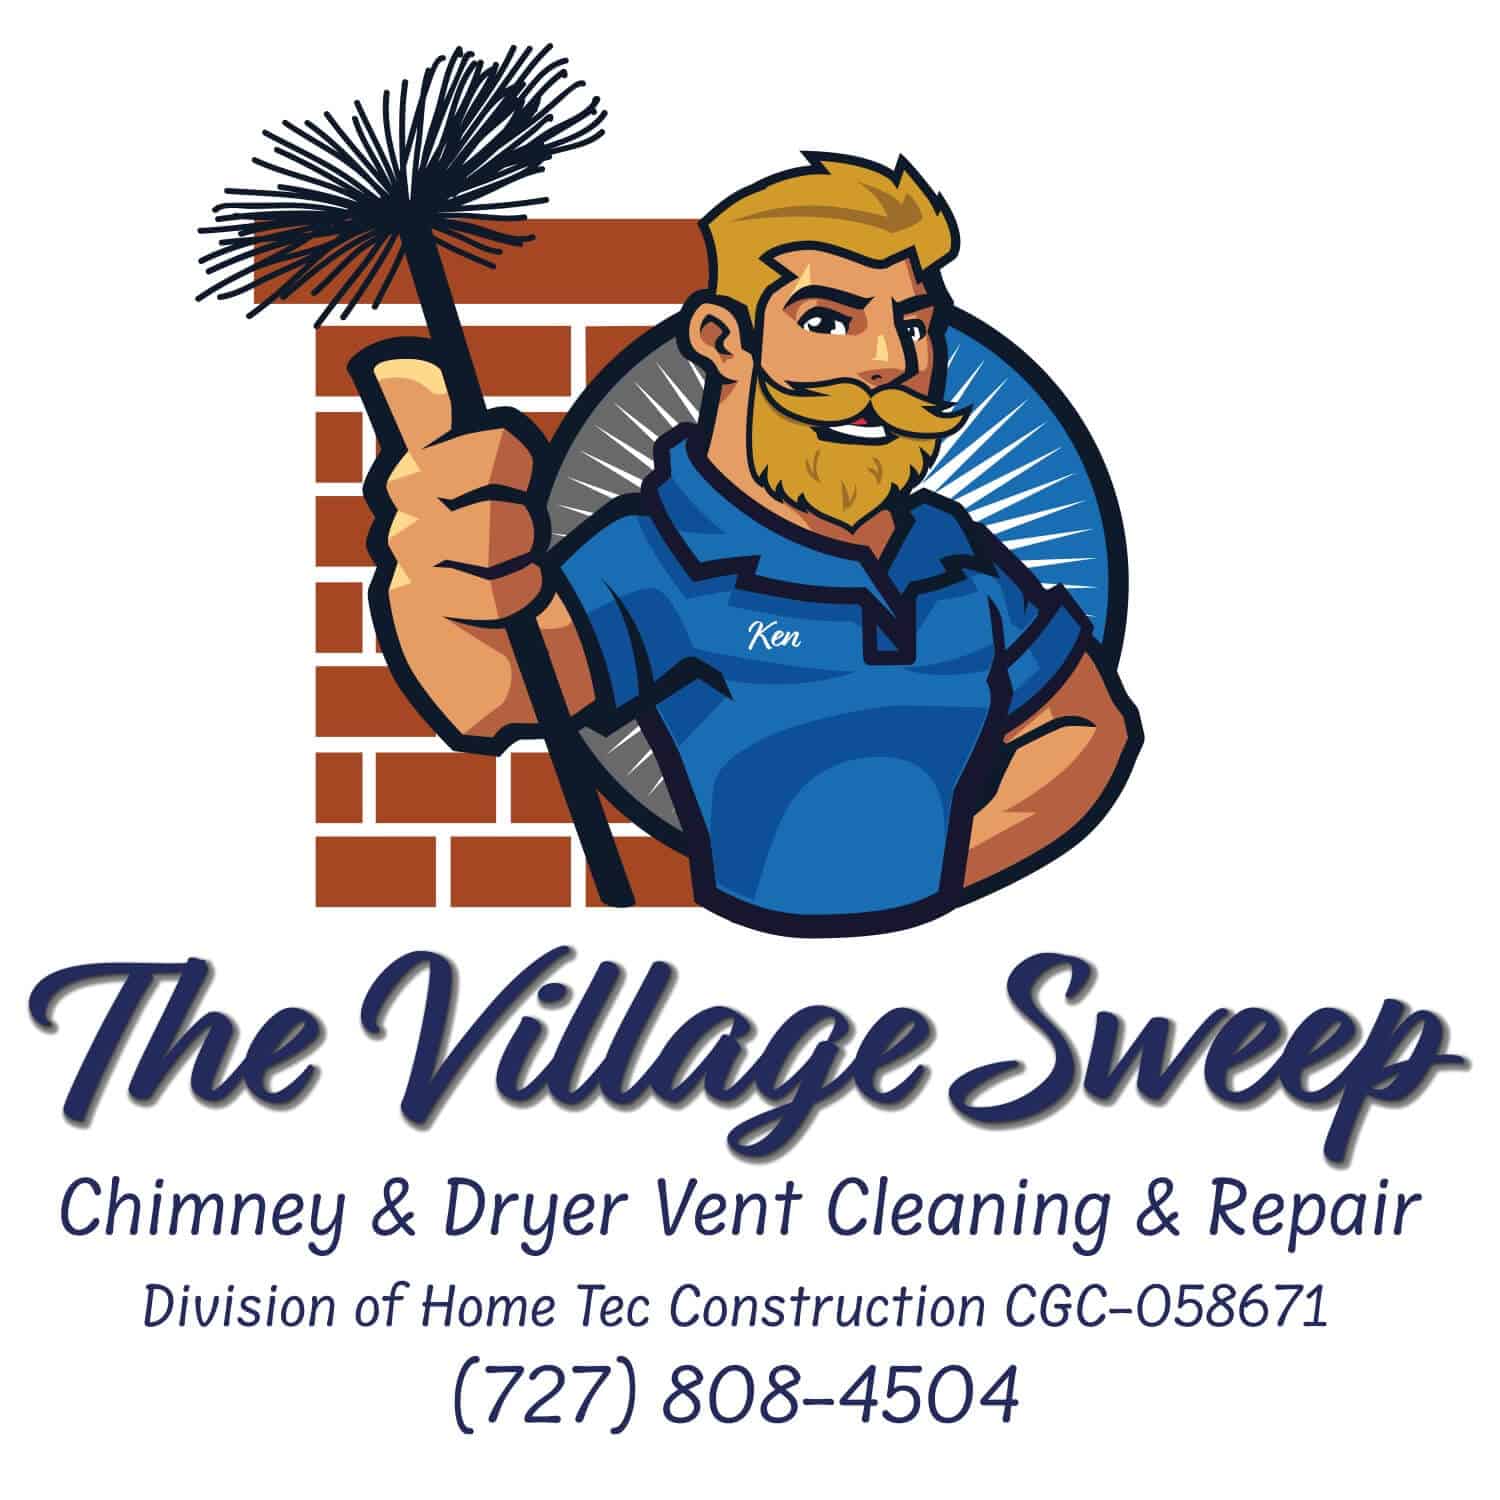 The Village Sweep